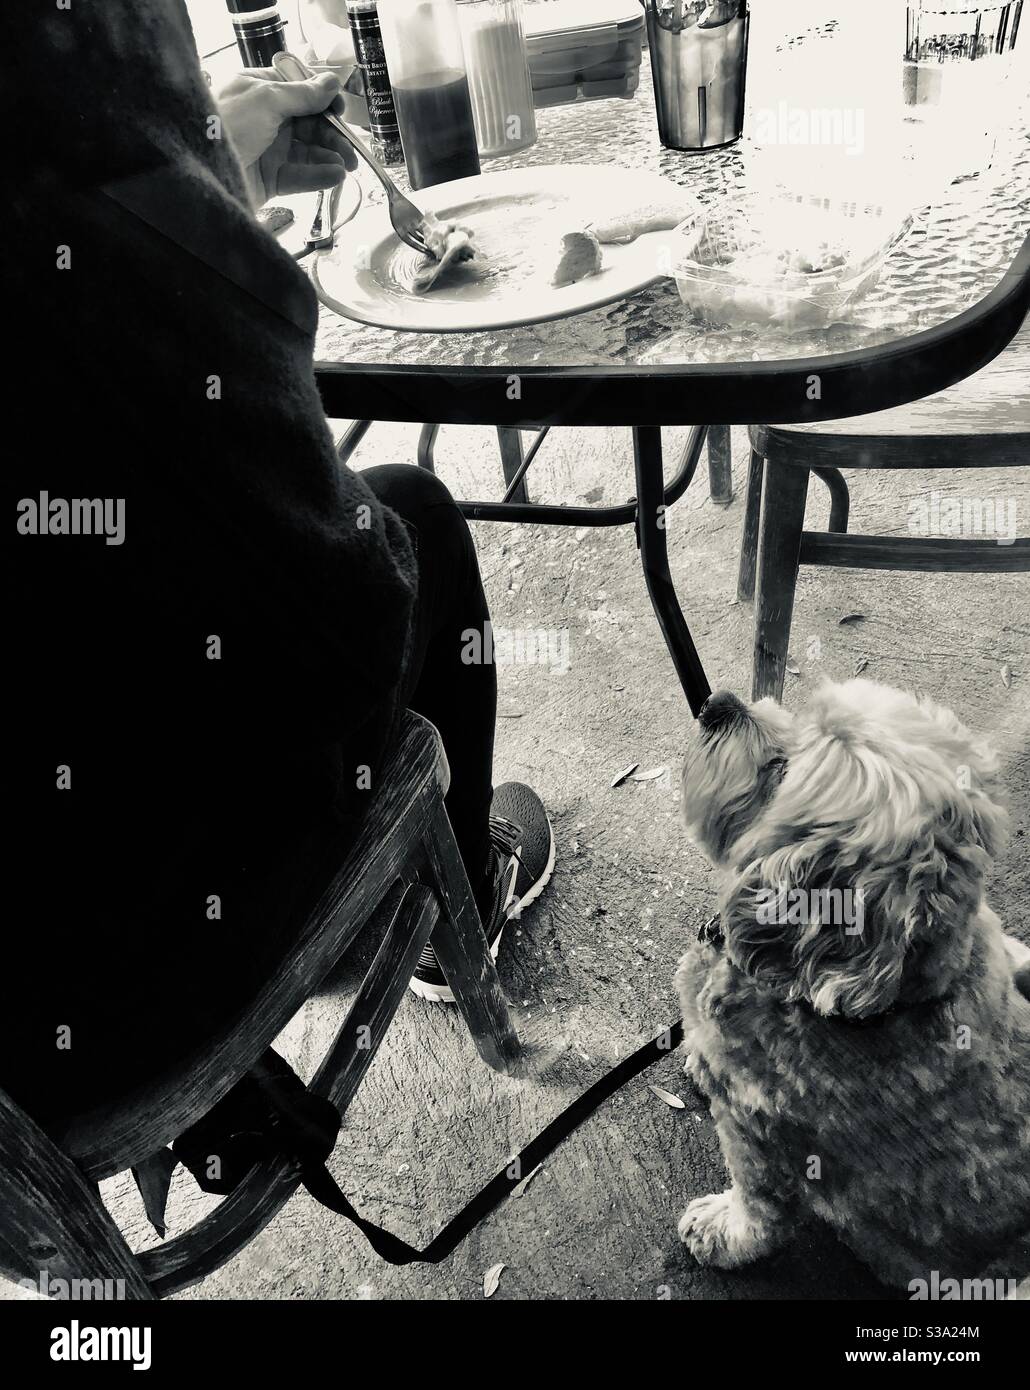 Dog waiting for food scraps from its owner at an outdoor restaurant. Stock Photo